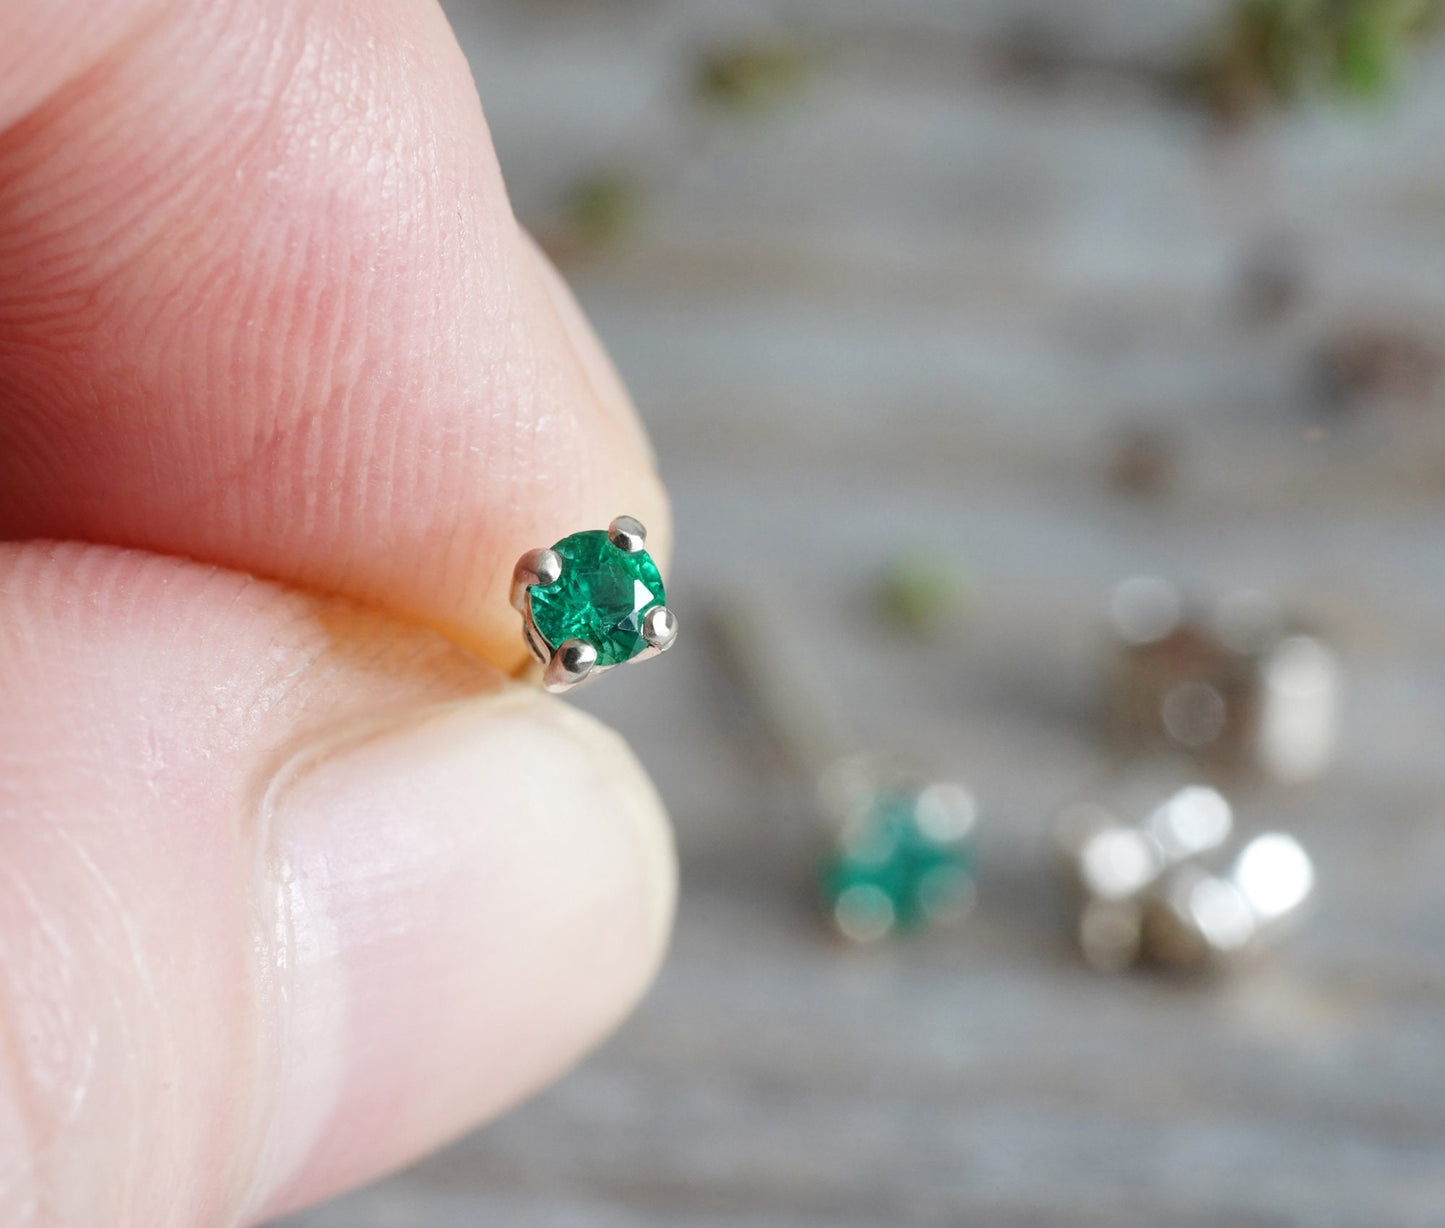 Emerald Stud Earrings in 18ct White Gold, Small Emerald Ear Posts